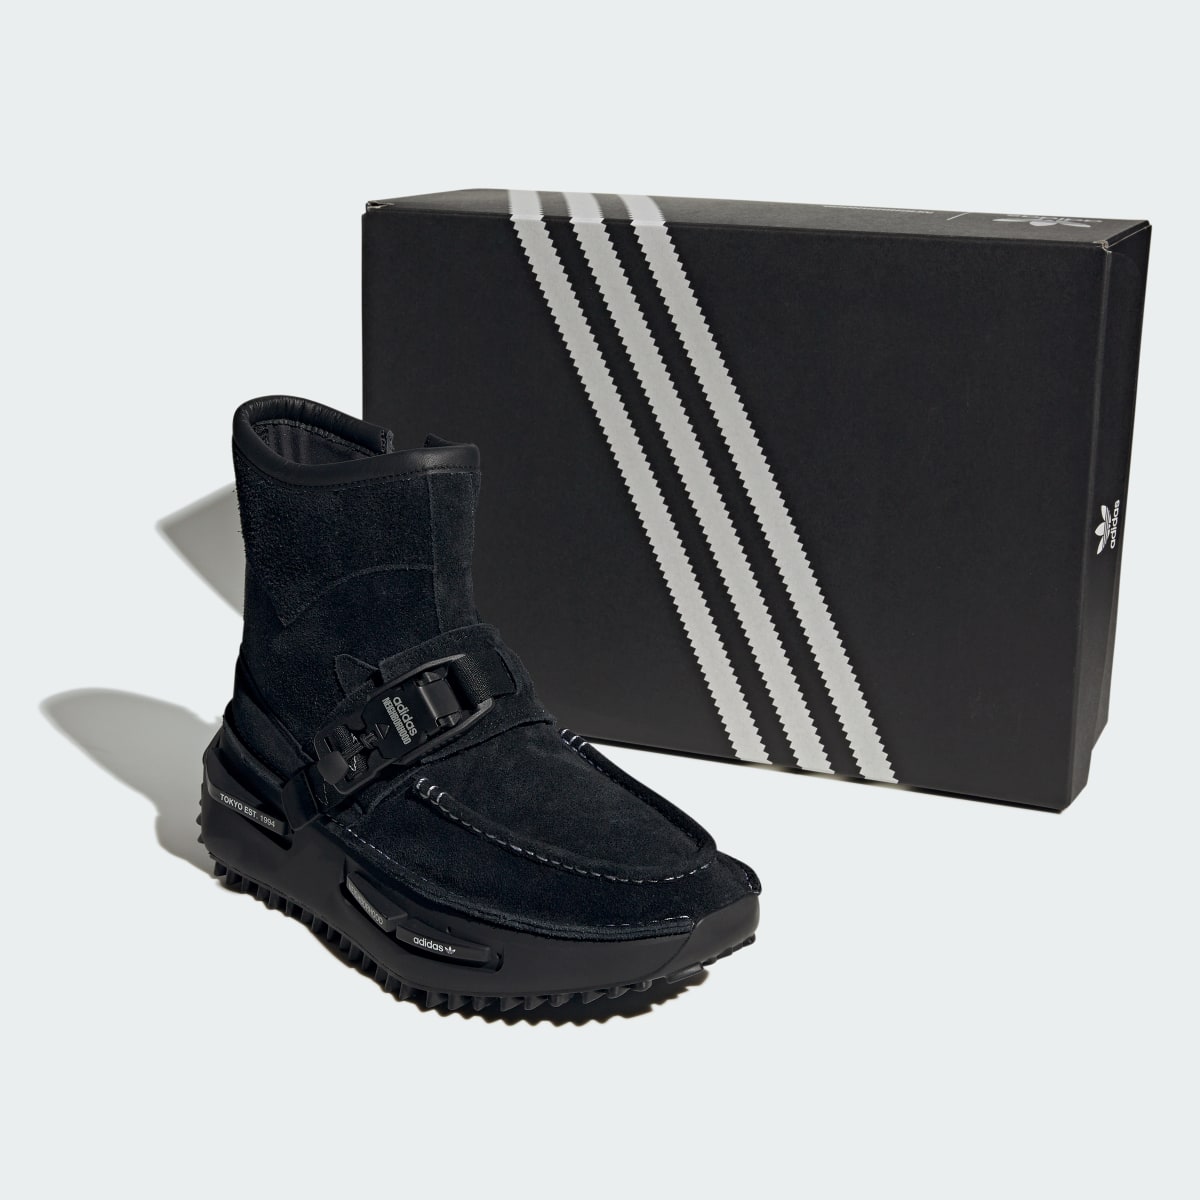 Adidas NMD_S1 Boots. 10